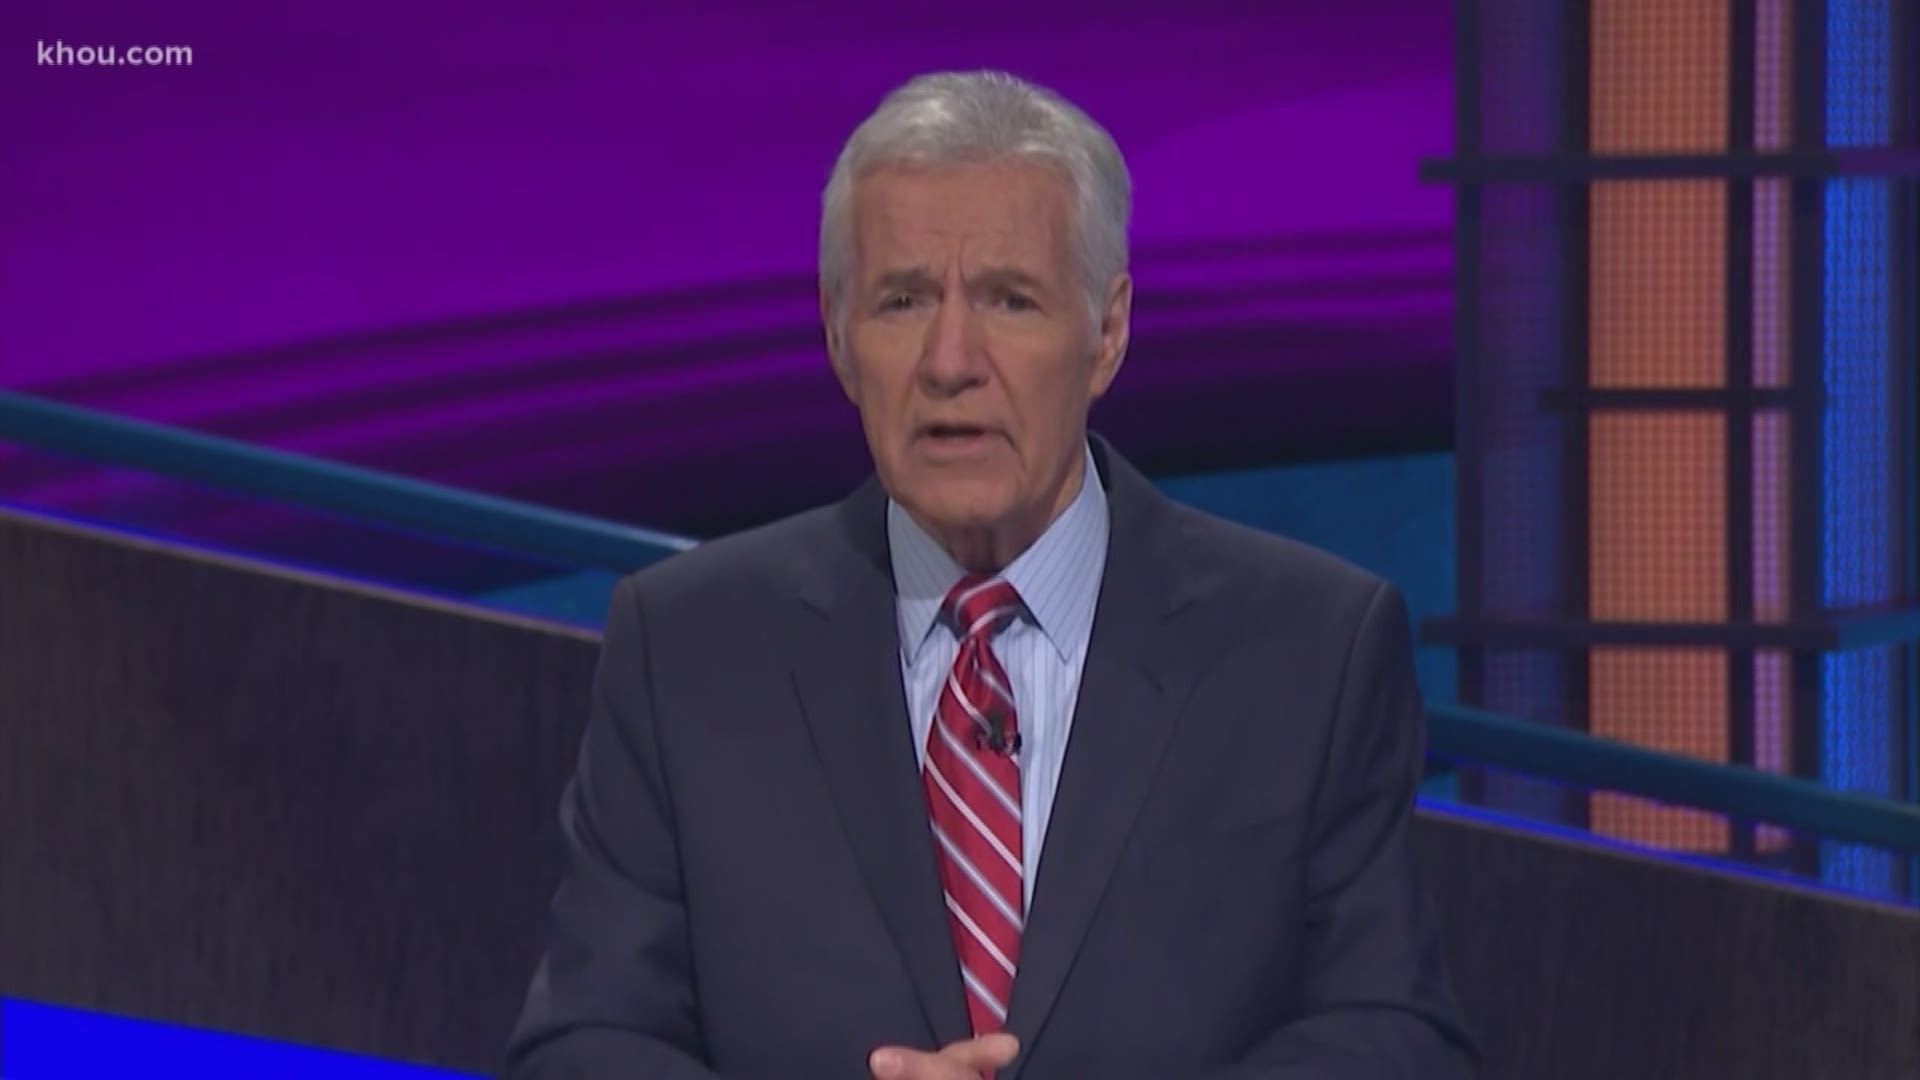 News that “Jeopardy” host Alex Trebek has stage 4 pancreatic cancer sent shockwaves through the nation. It’s one of the deadliest forms of cancer, in part because there are usually no signs or symptoms until it’s already spread outside of the pancreas.